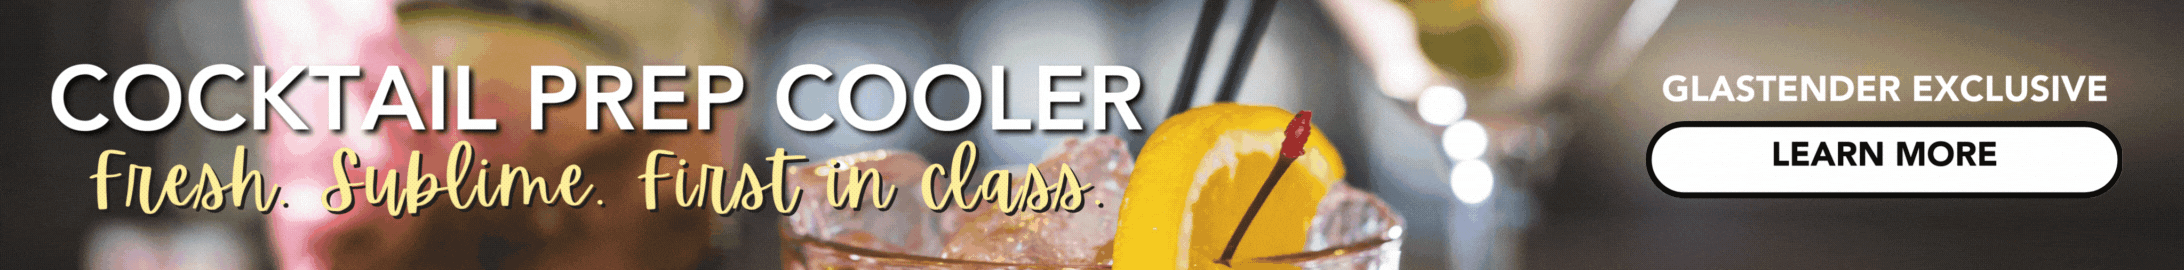 Cocktail Prep Cooler. Fresh, sublime, best in class. Gastender exclusive. Learn more.